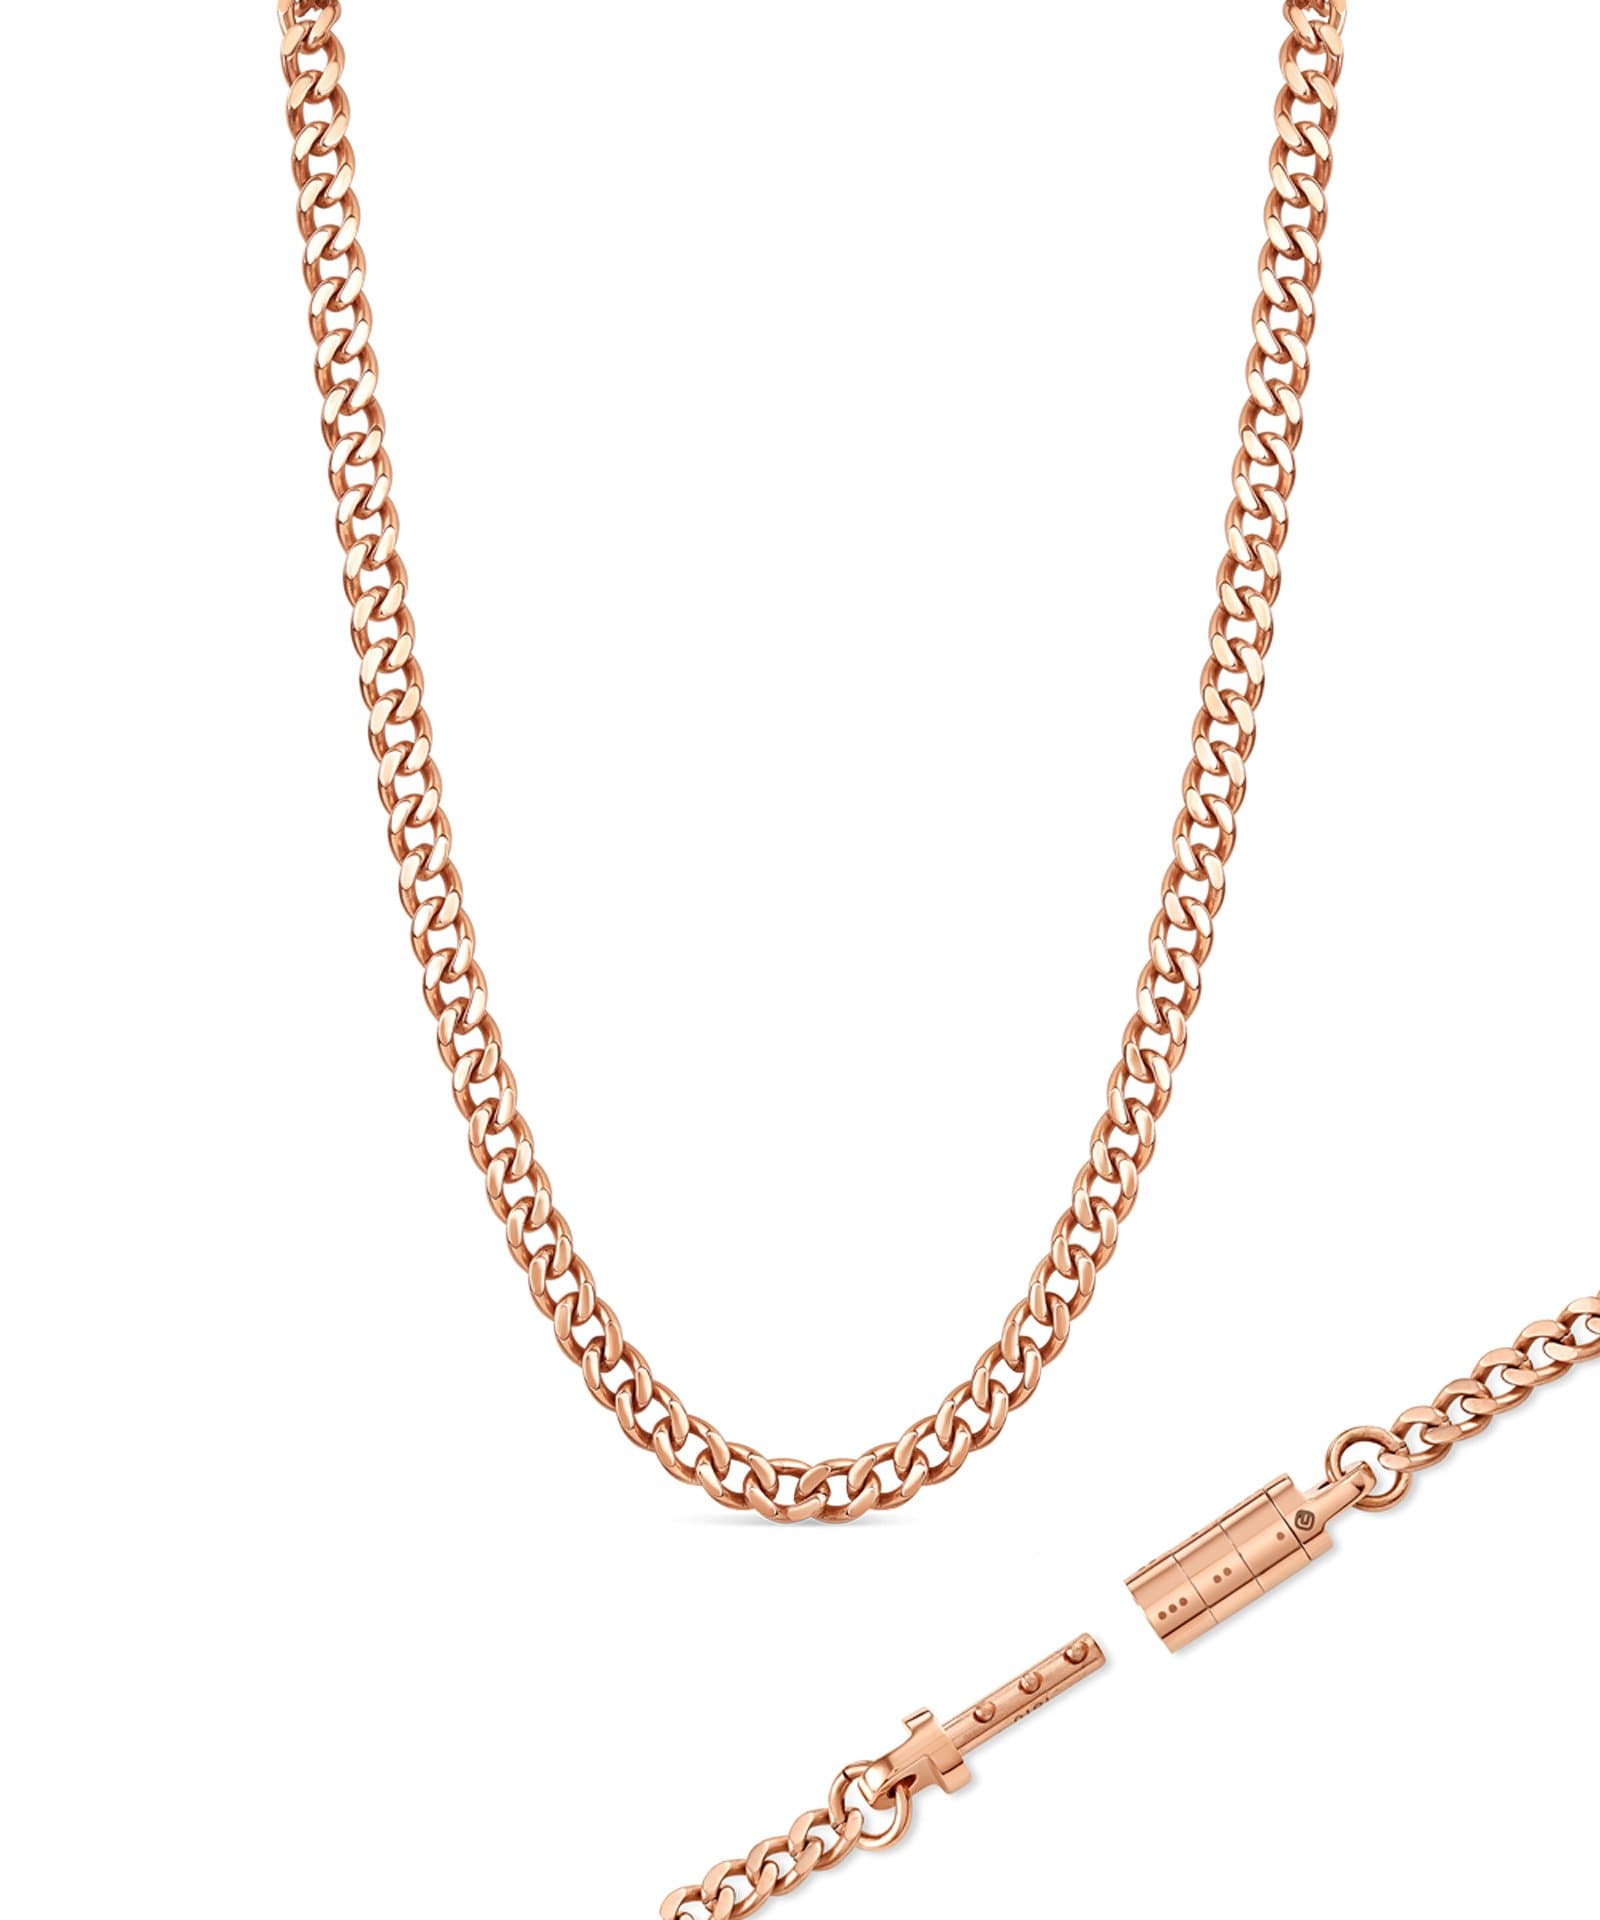 REFLECTION CHAIN NECKLACE (18K GOLD PLATED) – KIRSTIN ASH (United States)